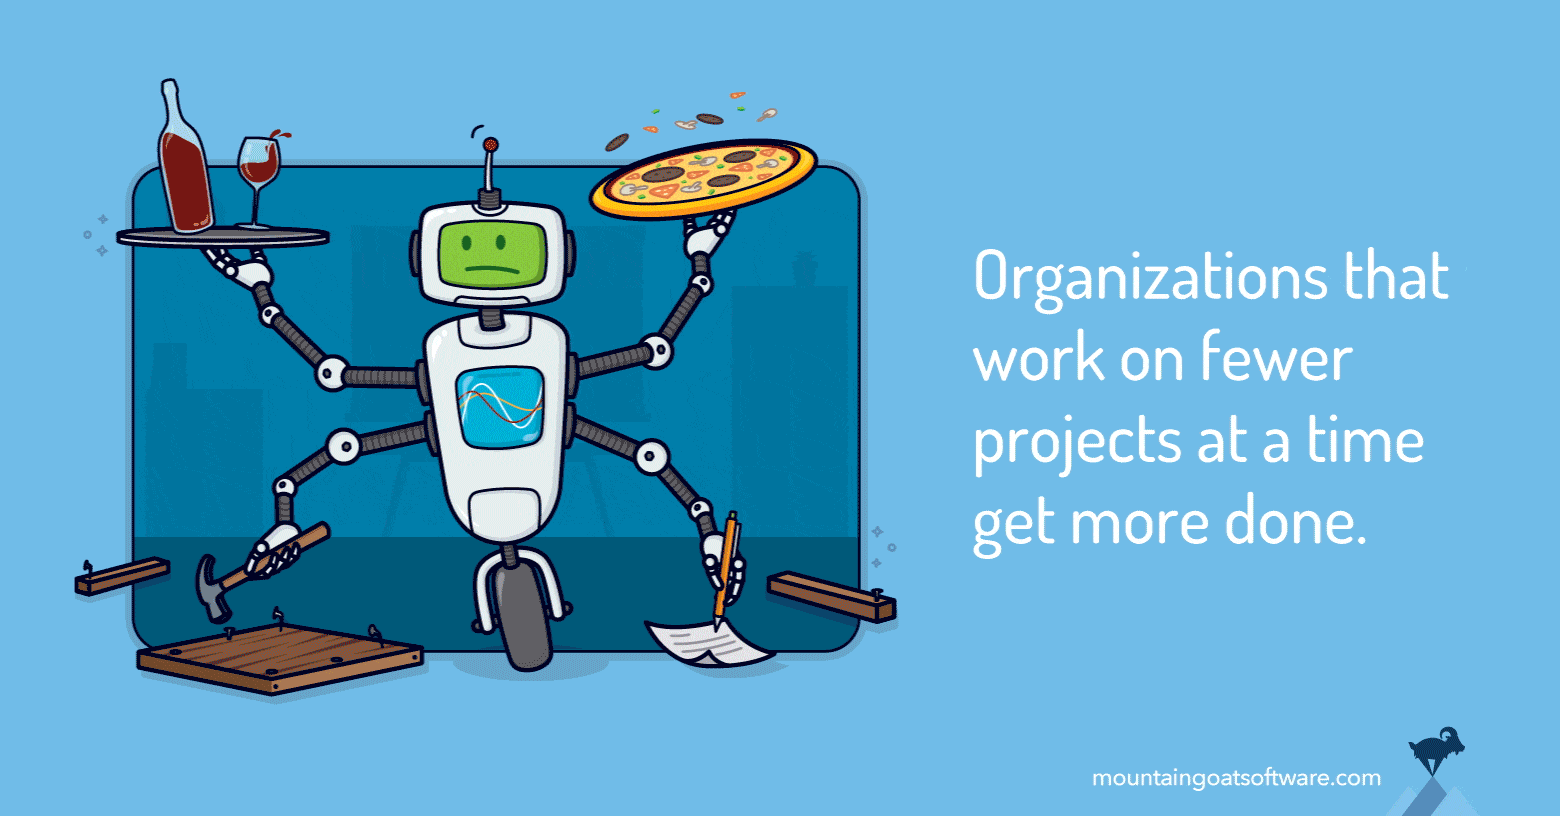 Organizations that Work on Fewer Projects at a Time Get More Done